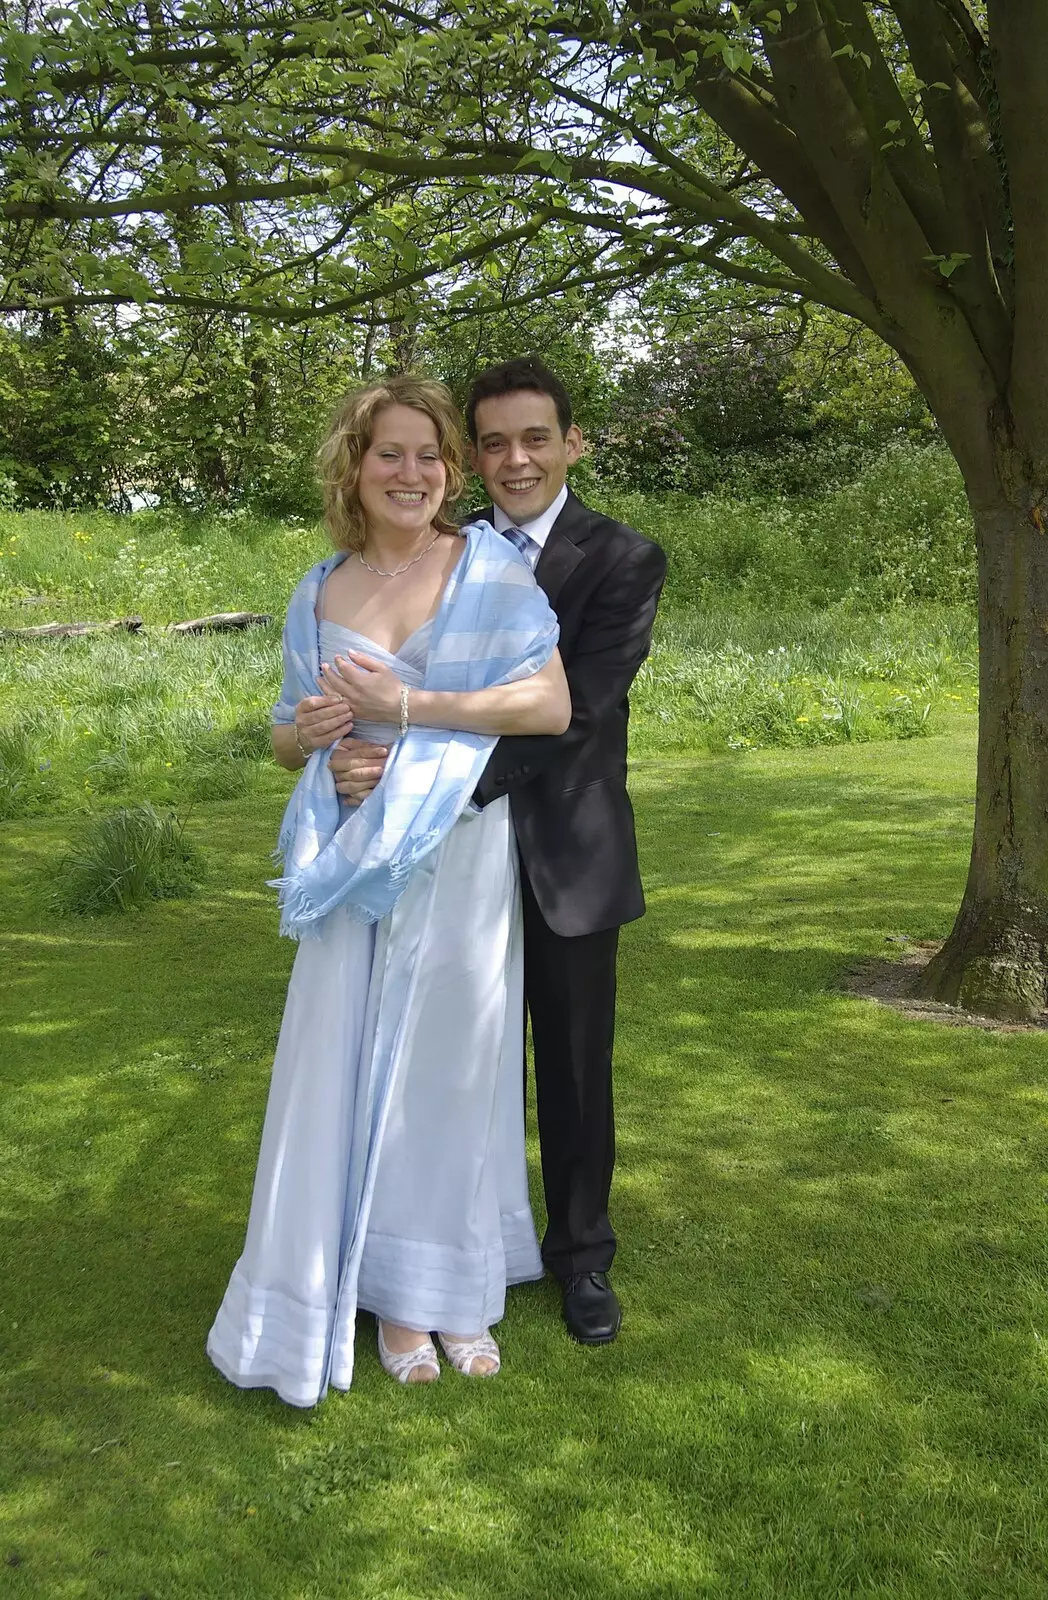 A photo under a tree, from Hani and Anne's Wedding, County Hall, Cambridge - 2nd May 2008